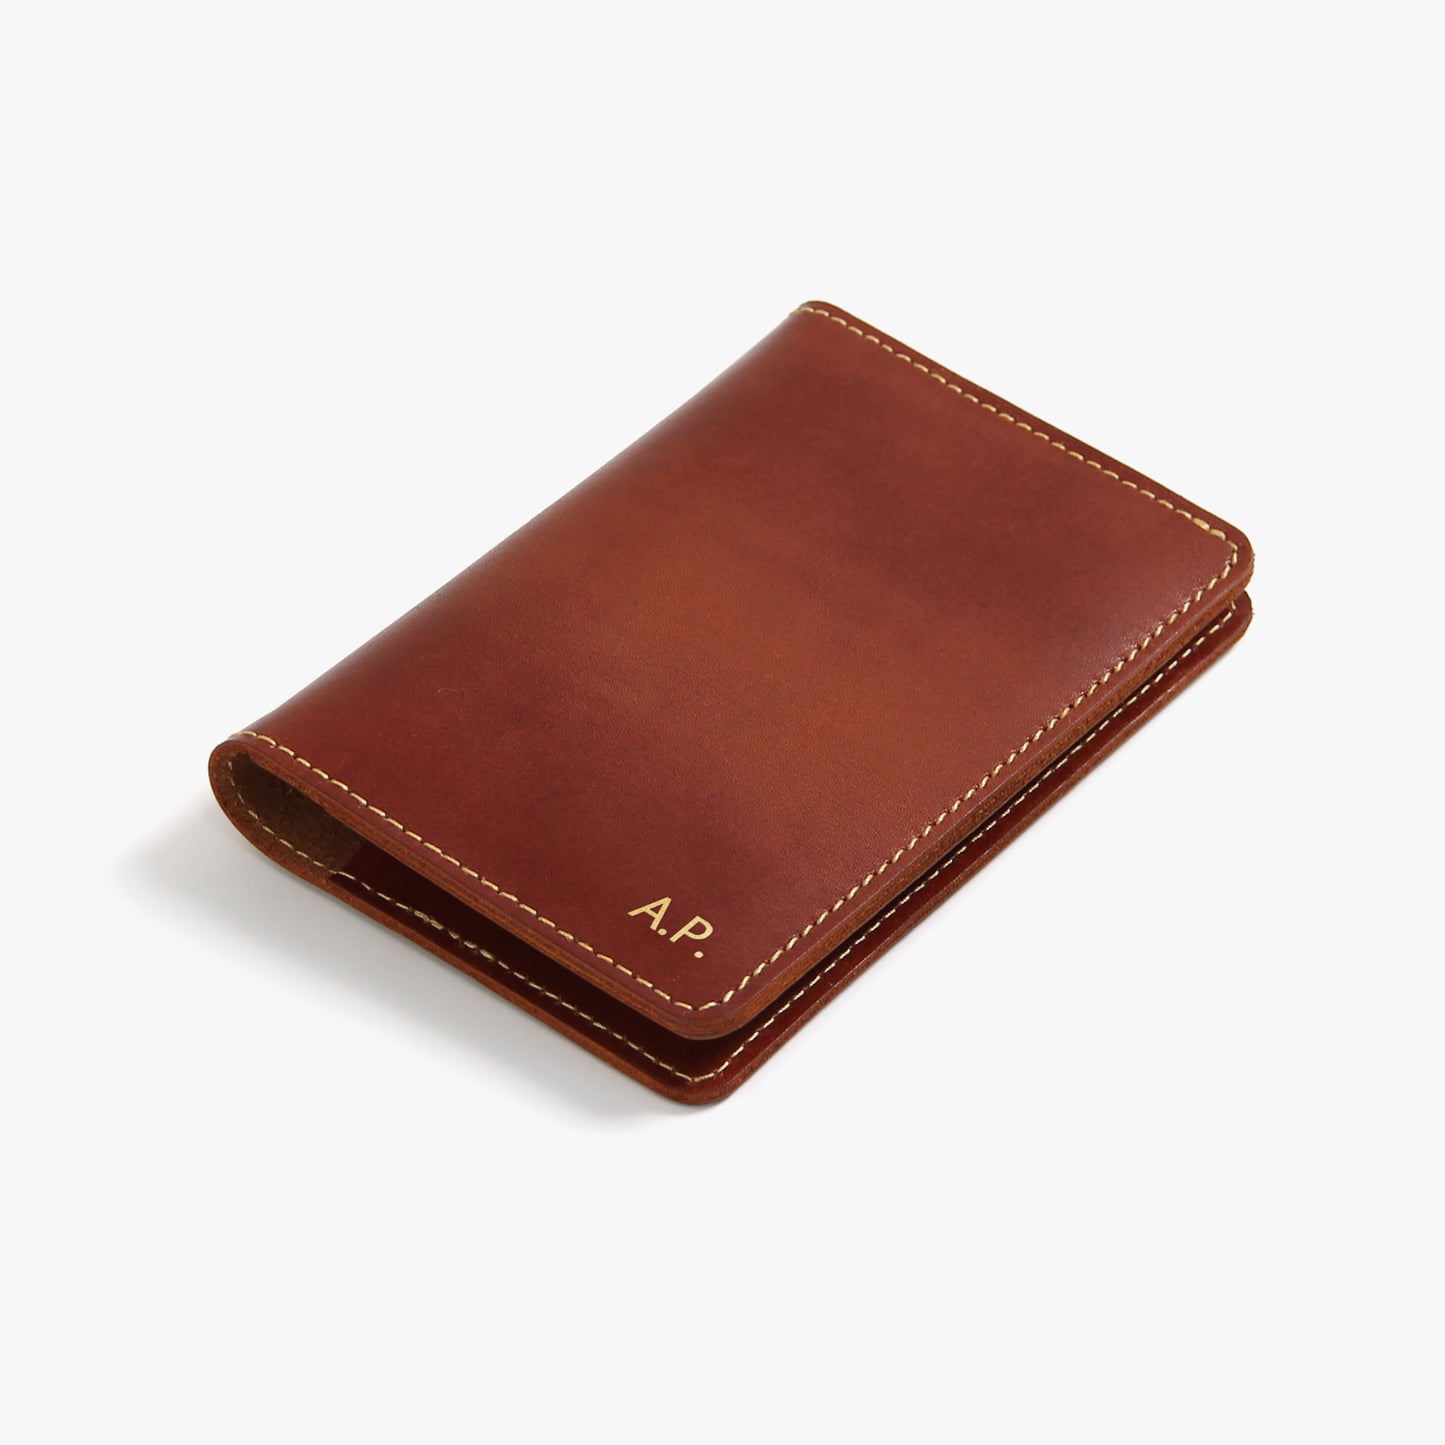 Passport Holder Leather Passport cover with Card Holders